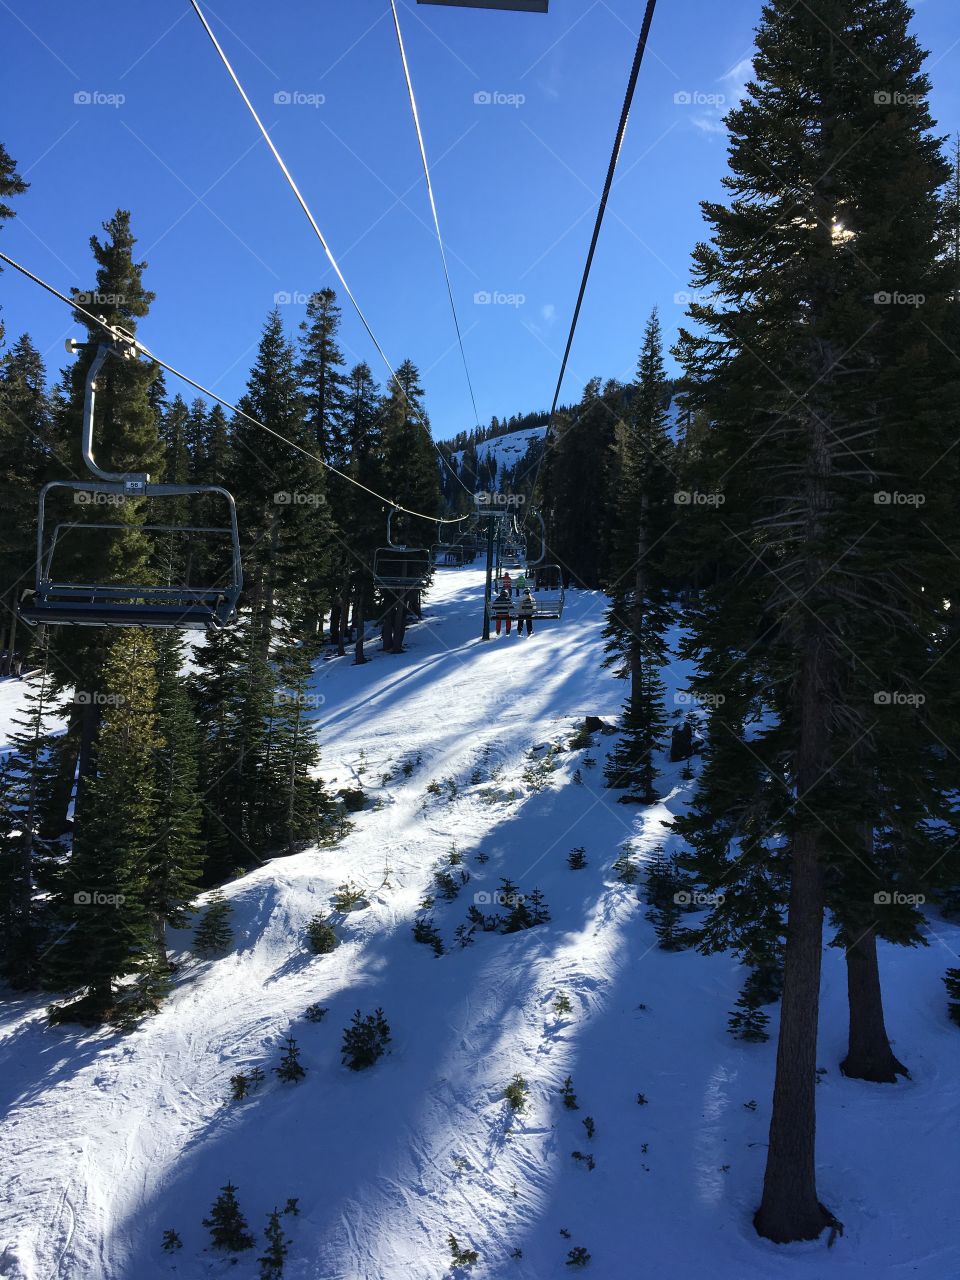 Ski chair lift in the slopes